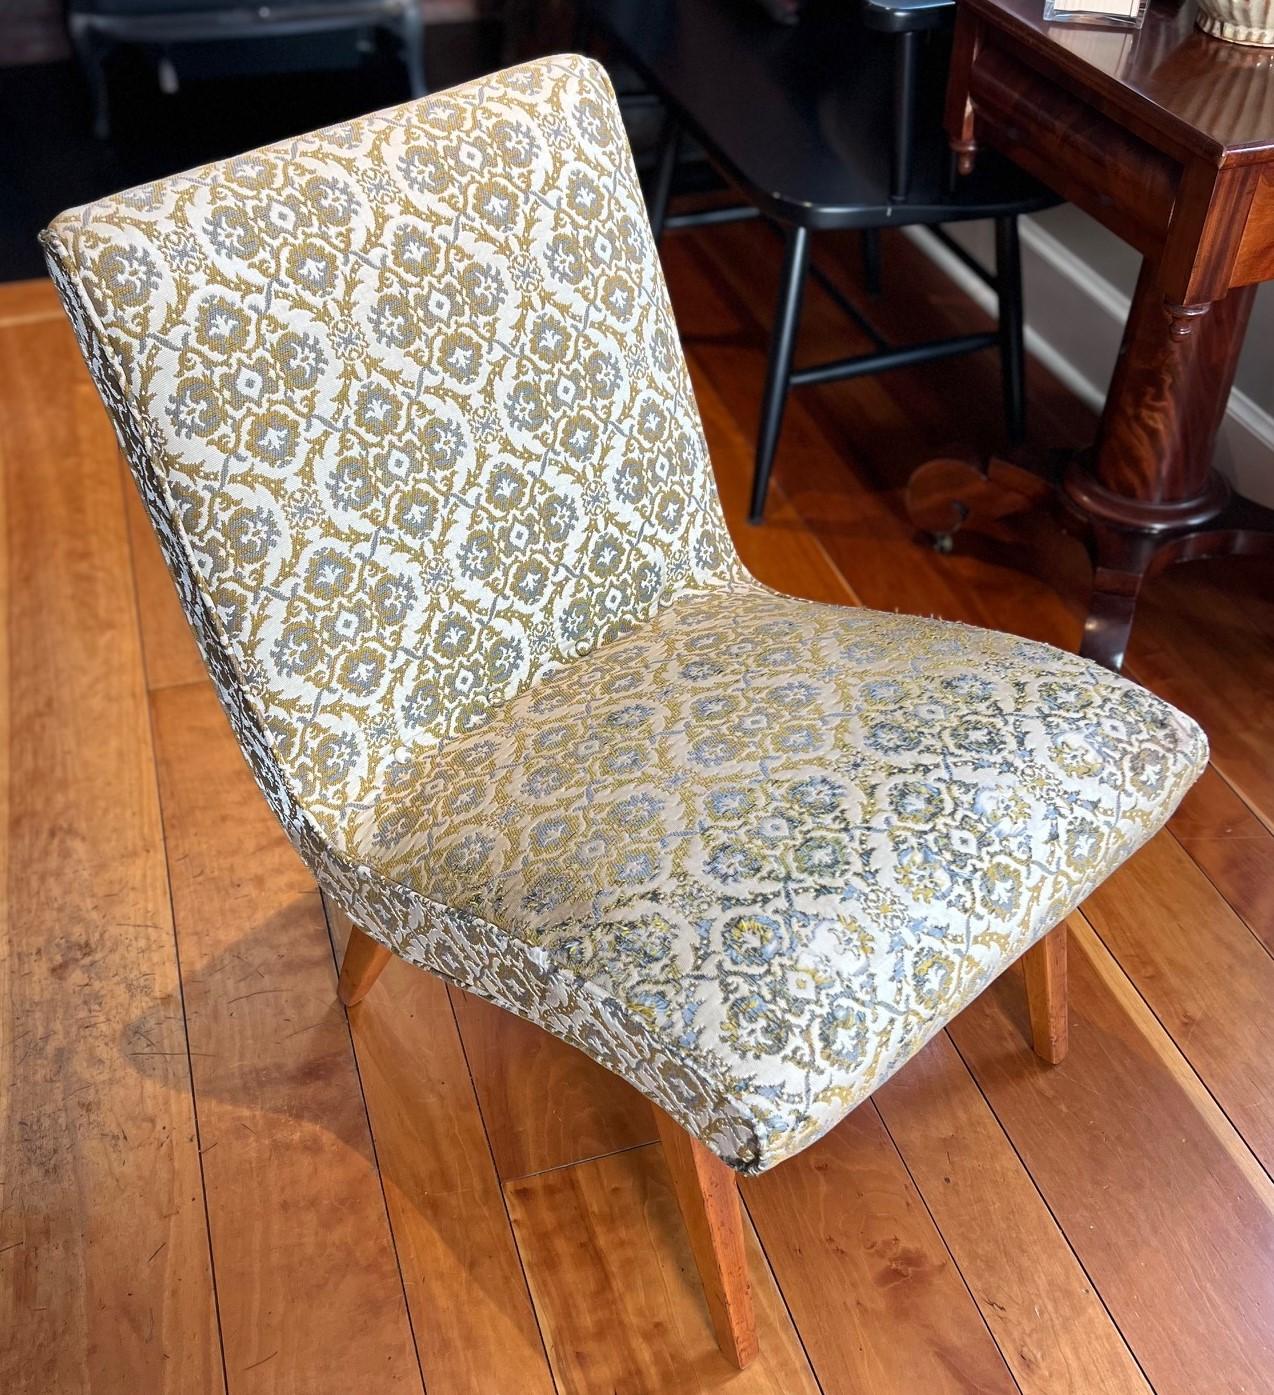 A 1940s Jens Risom for Knoll Associates Inc. Vostra Easy chair upholstered in a cream, golden and blue damask fabric. Unconventional and memorable, it was the epitome of a new departure in high design, and remains an example of the timeless quality